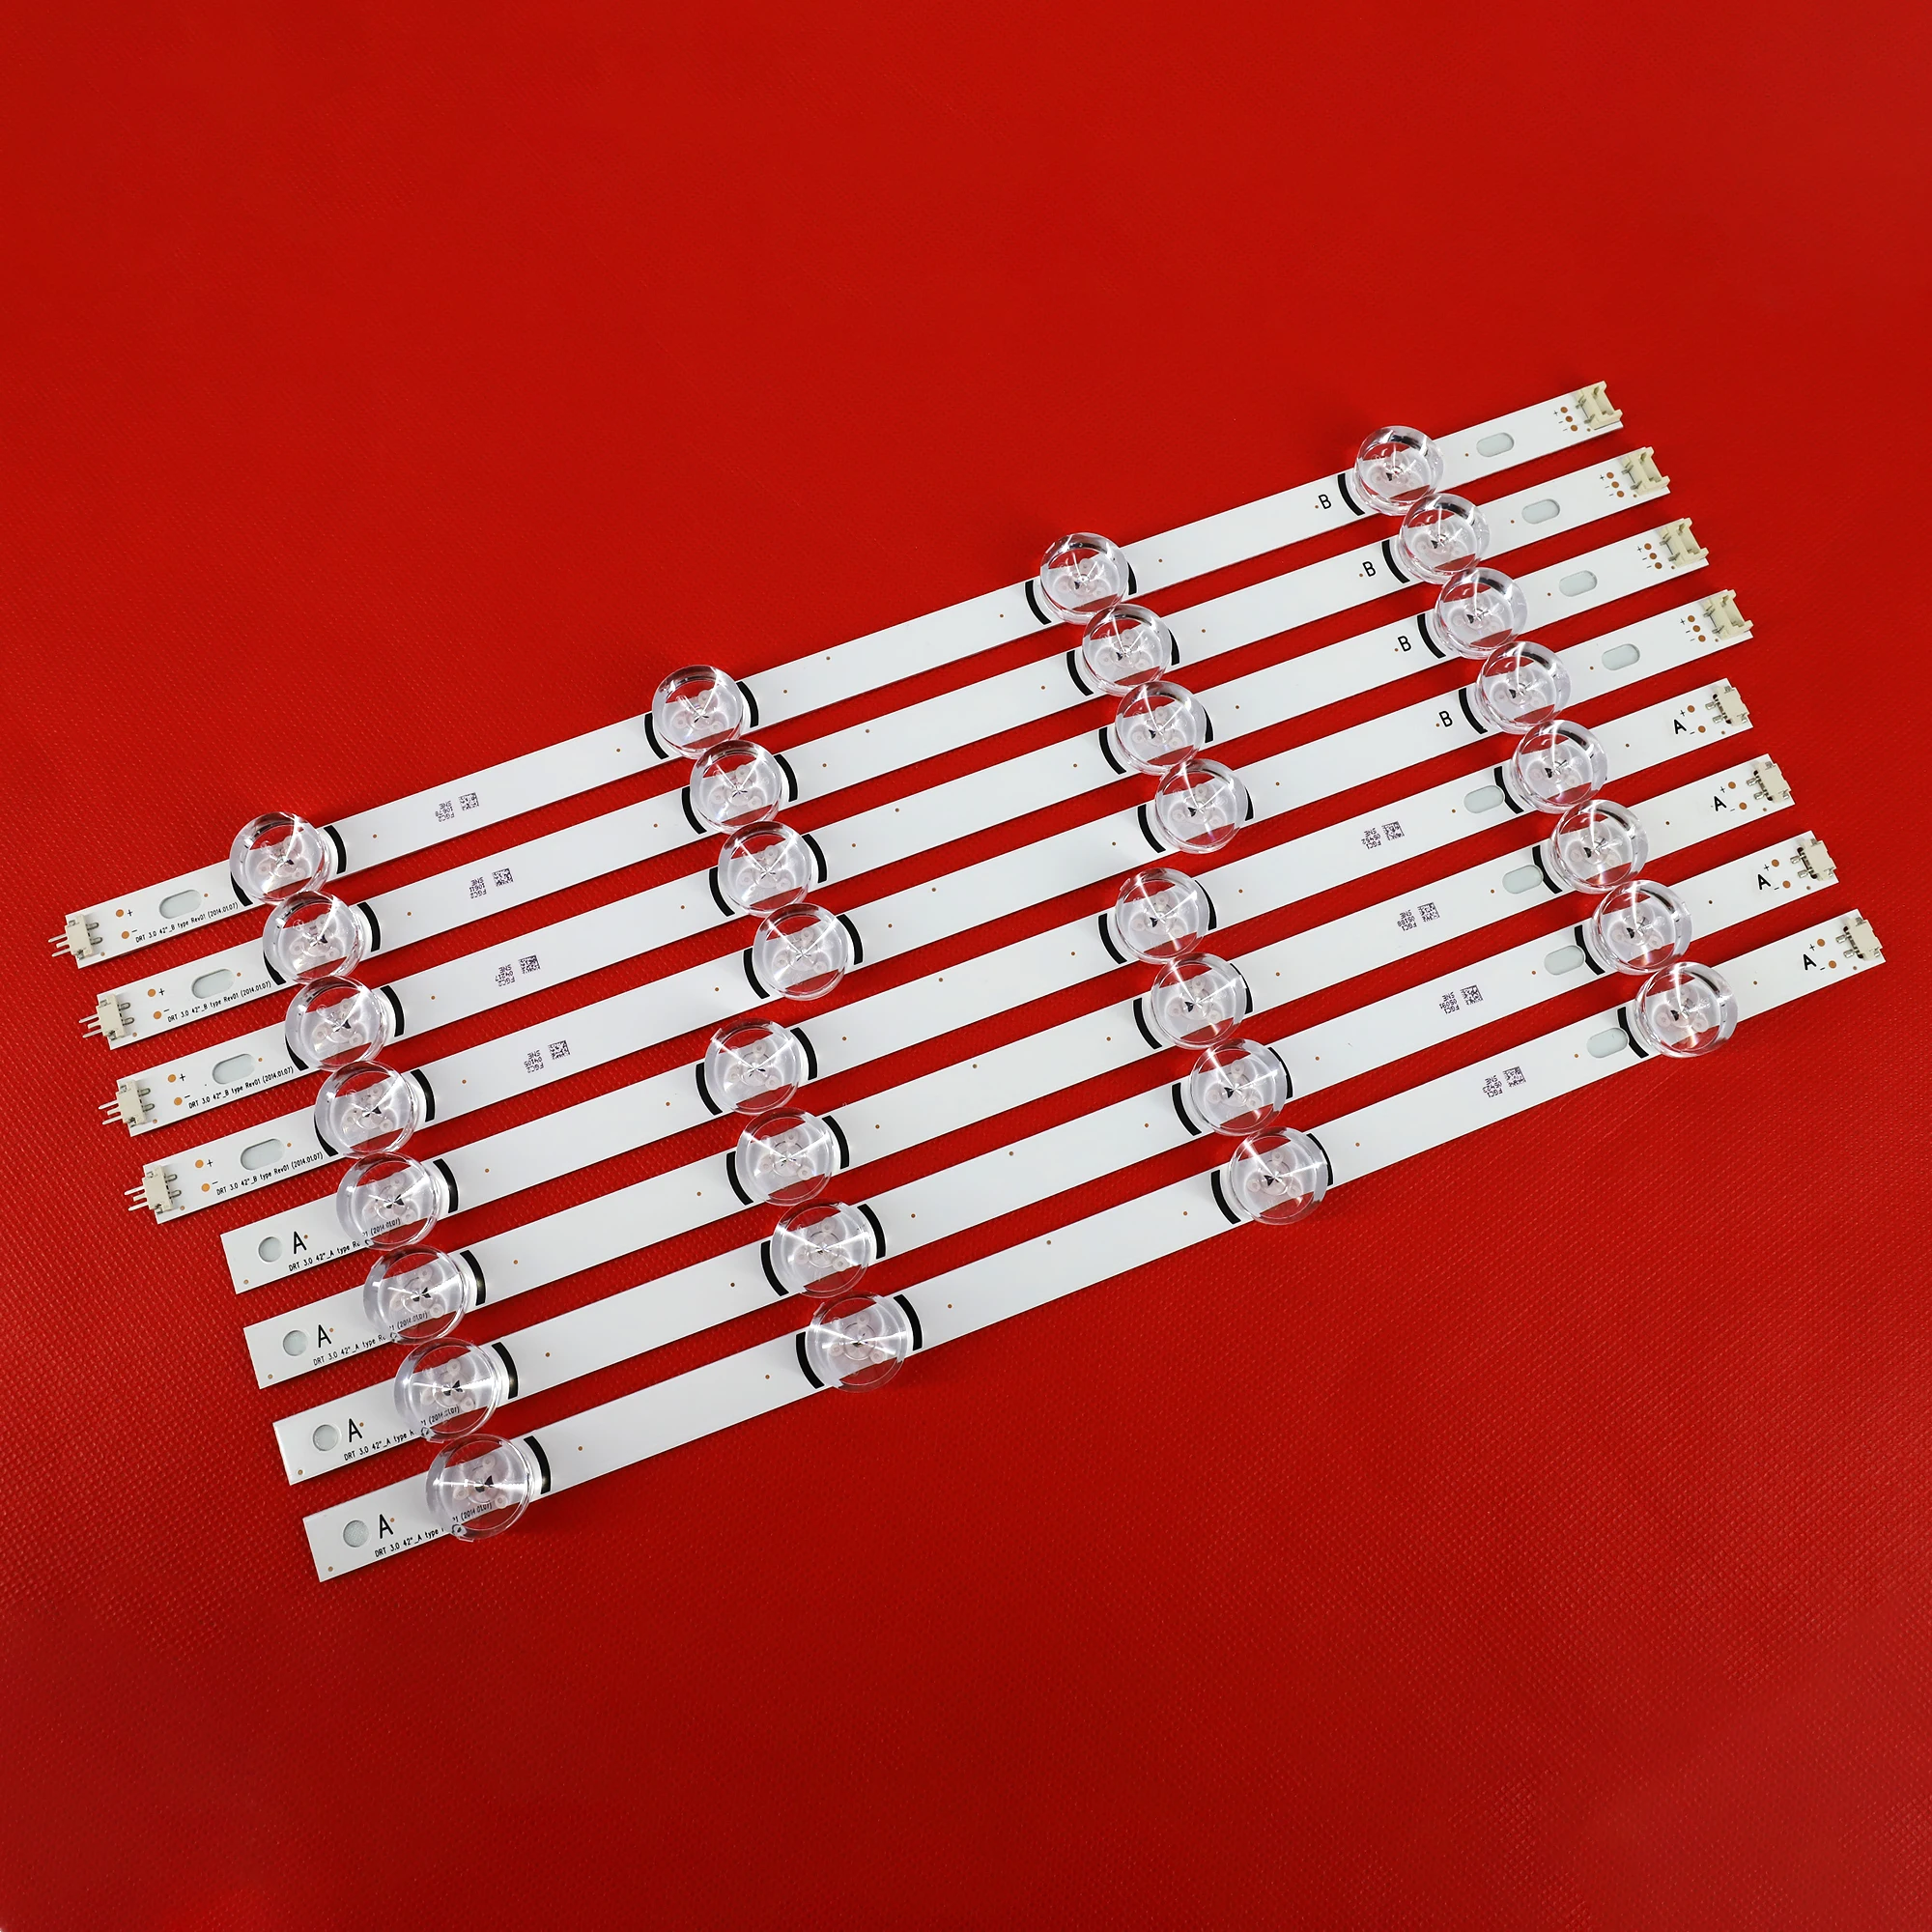 8 PCS(4*A,4*B) LED Strips Substituted New For LG INNOTEK DRT 3.0 42-A/B Type 6916L 1709B 1710B 1957E 1956E 6916L-1956A new 8 pcs 4 a 4 b led strips for lg innotek drt 3 0 42 a b type 6916l 1709b 1710b 1957e 1956e 6916l 1956a 6916l 1957a